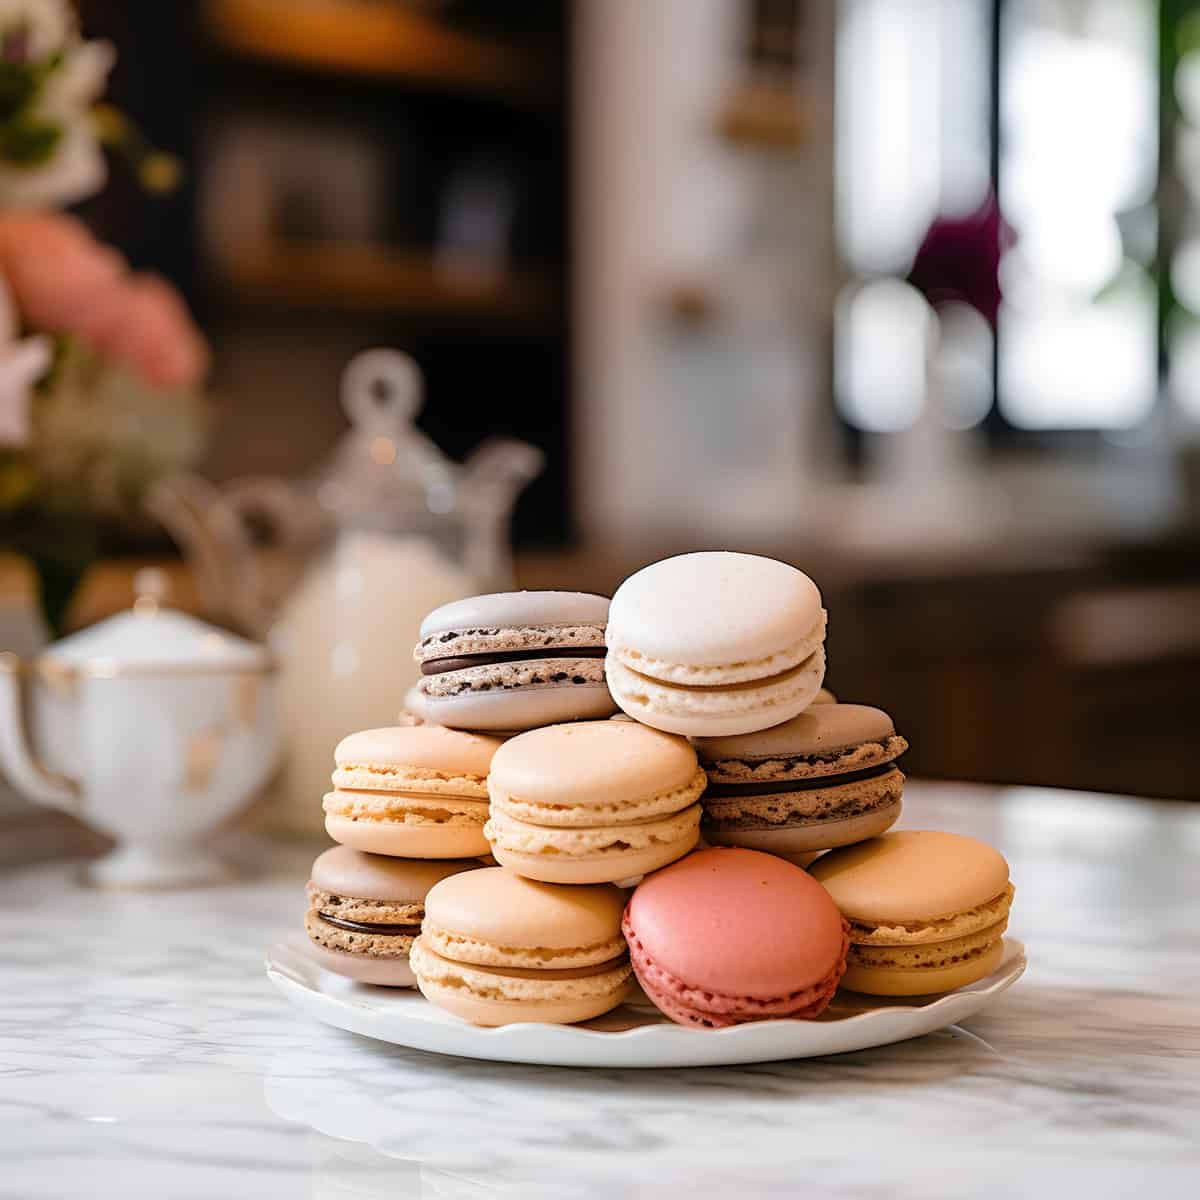 Macaroons on a kitchen counter